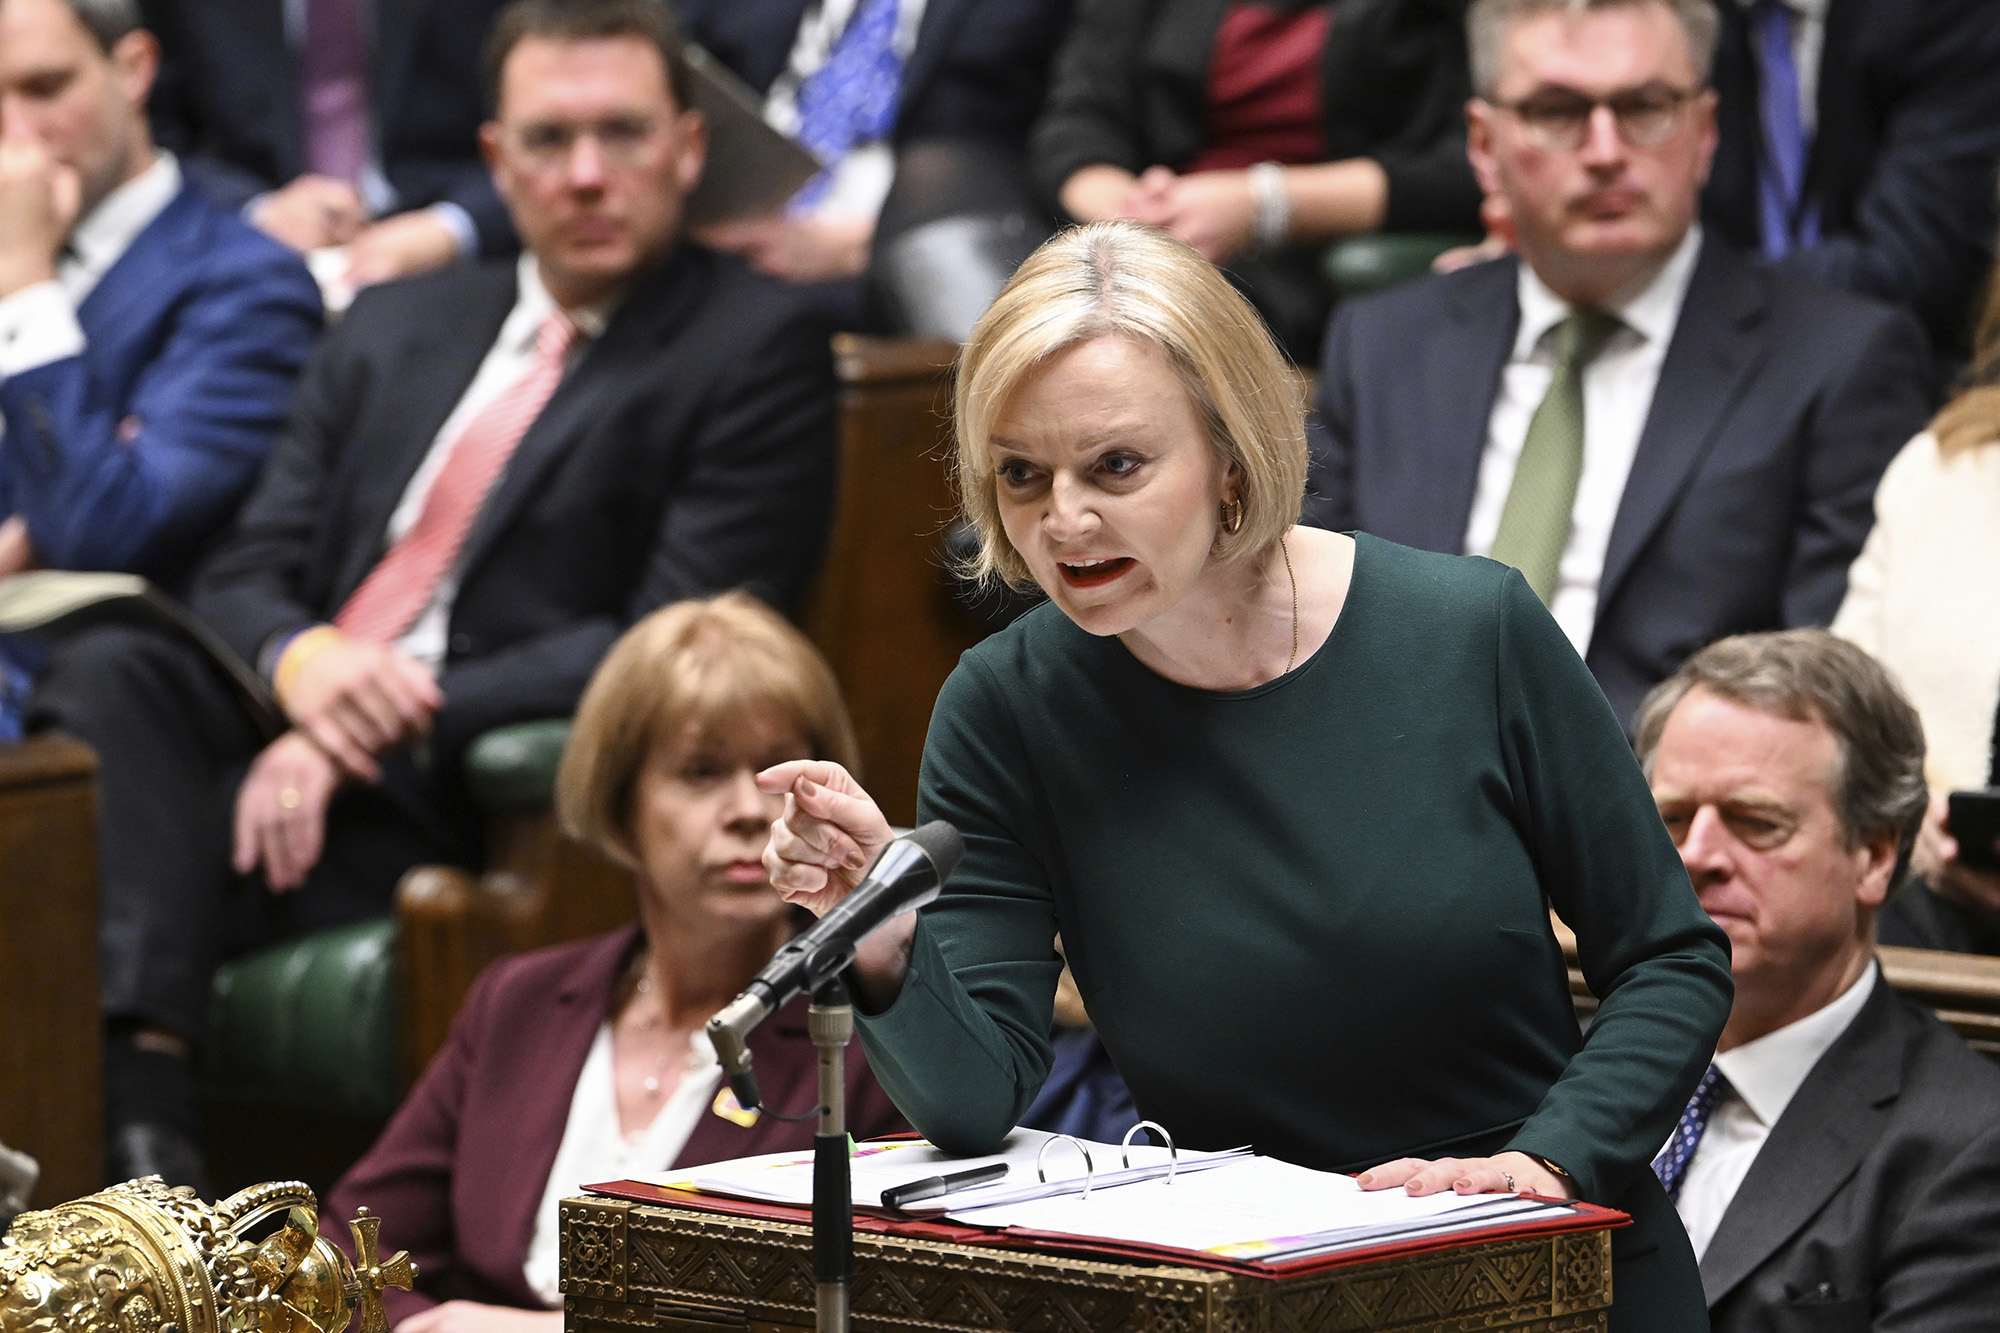 Britain's Prime Minister Liz Truss speaks during Prime Minister's Questions in the House of Commons in London, Engalnd, on October 12.